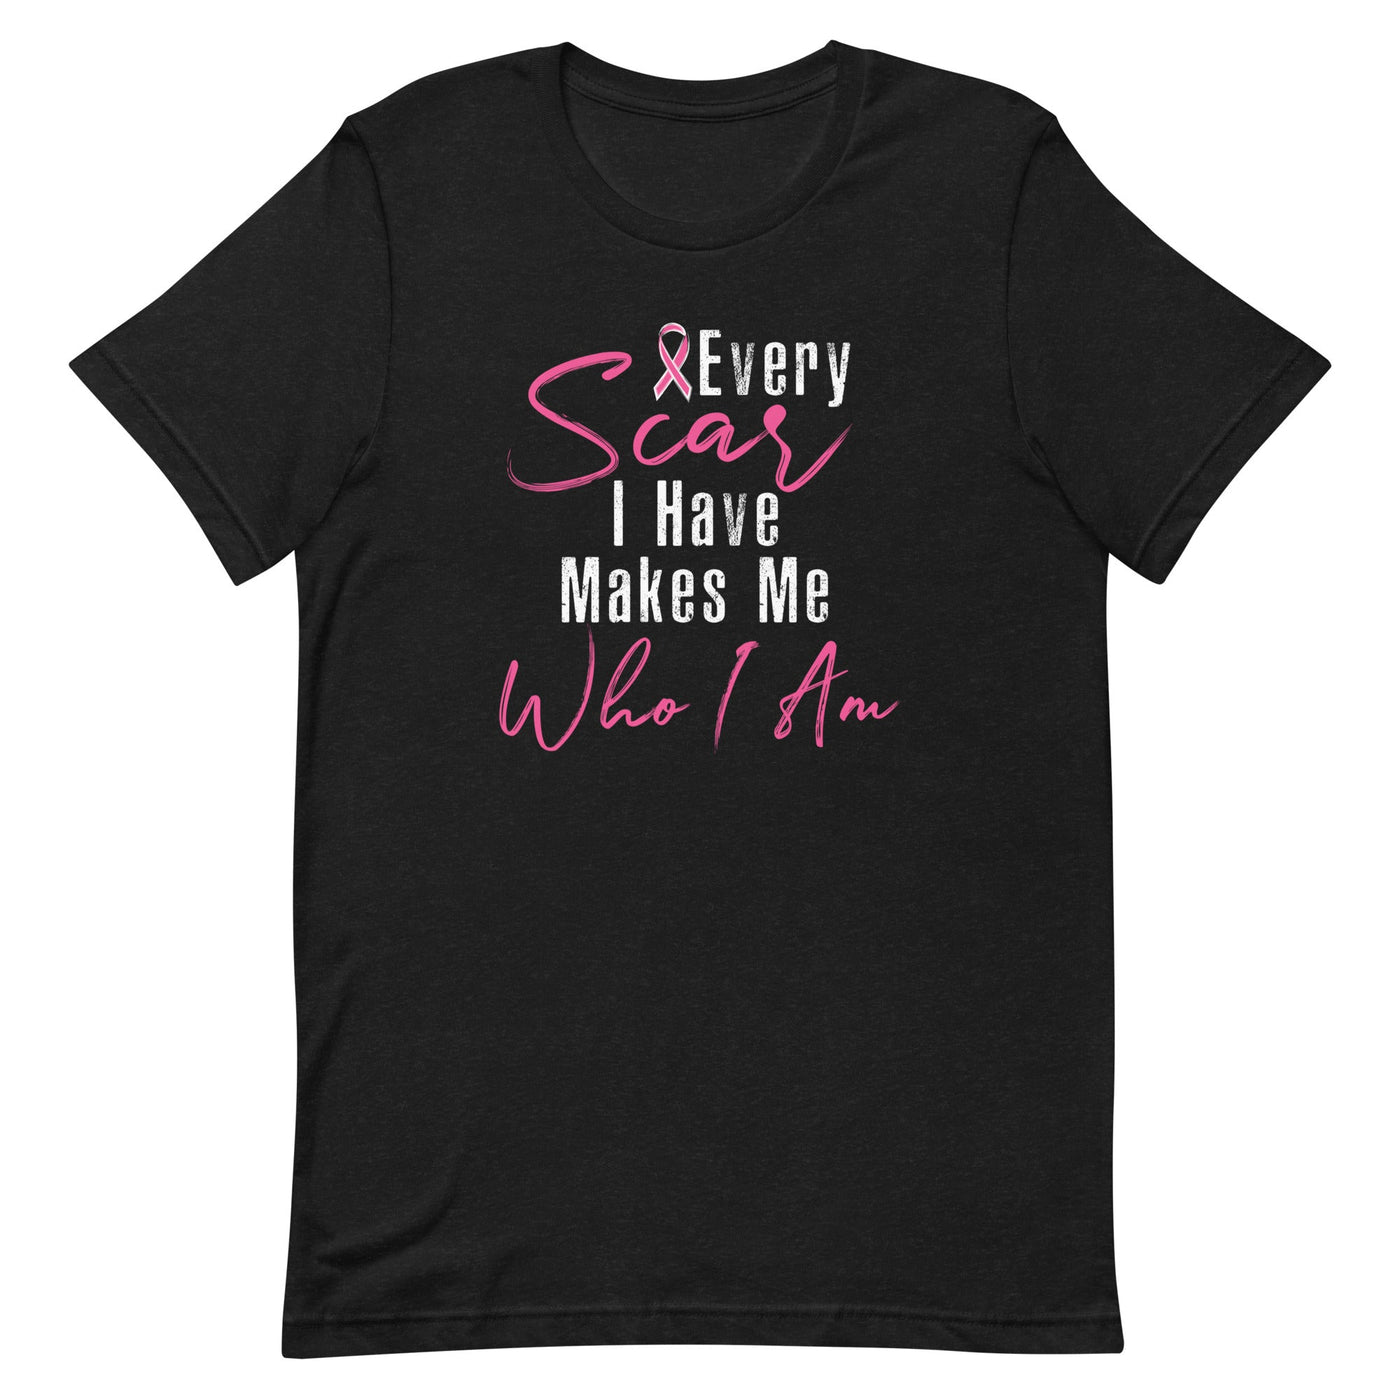 EVERY SCAR I HAVE MAKES ME WHO I AM WOMEN'S T-SHIRT- WHITE AND PINK FONT S 